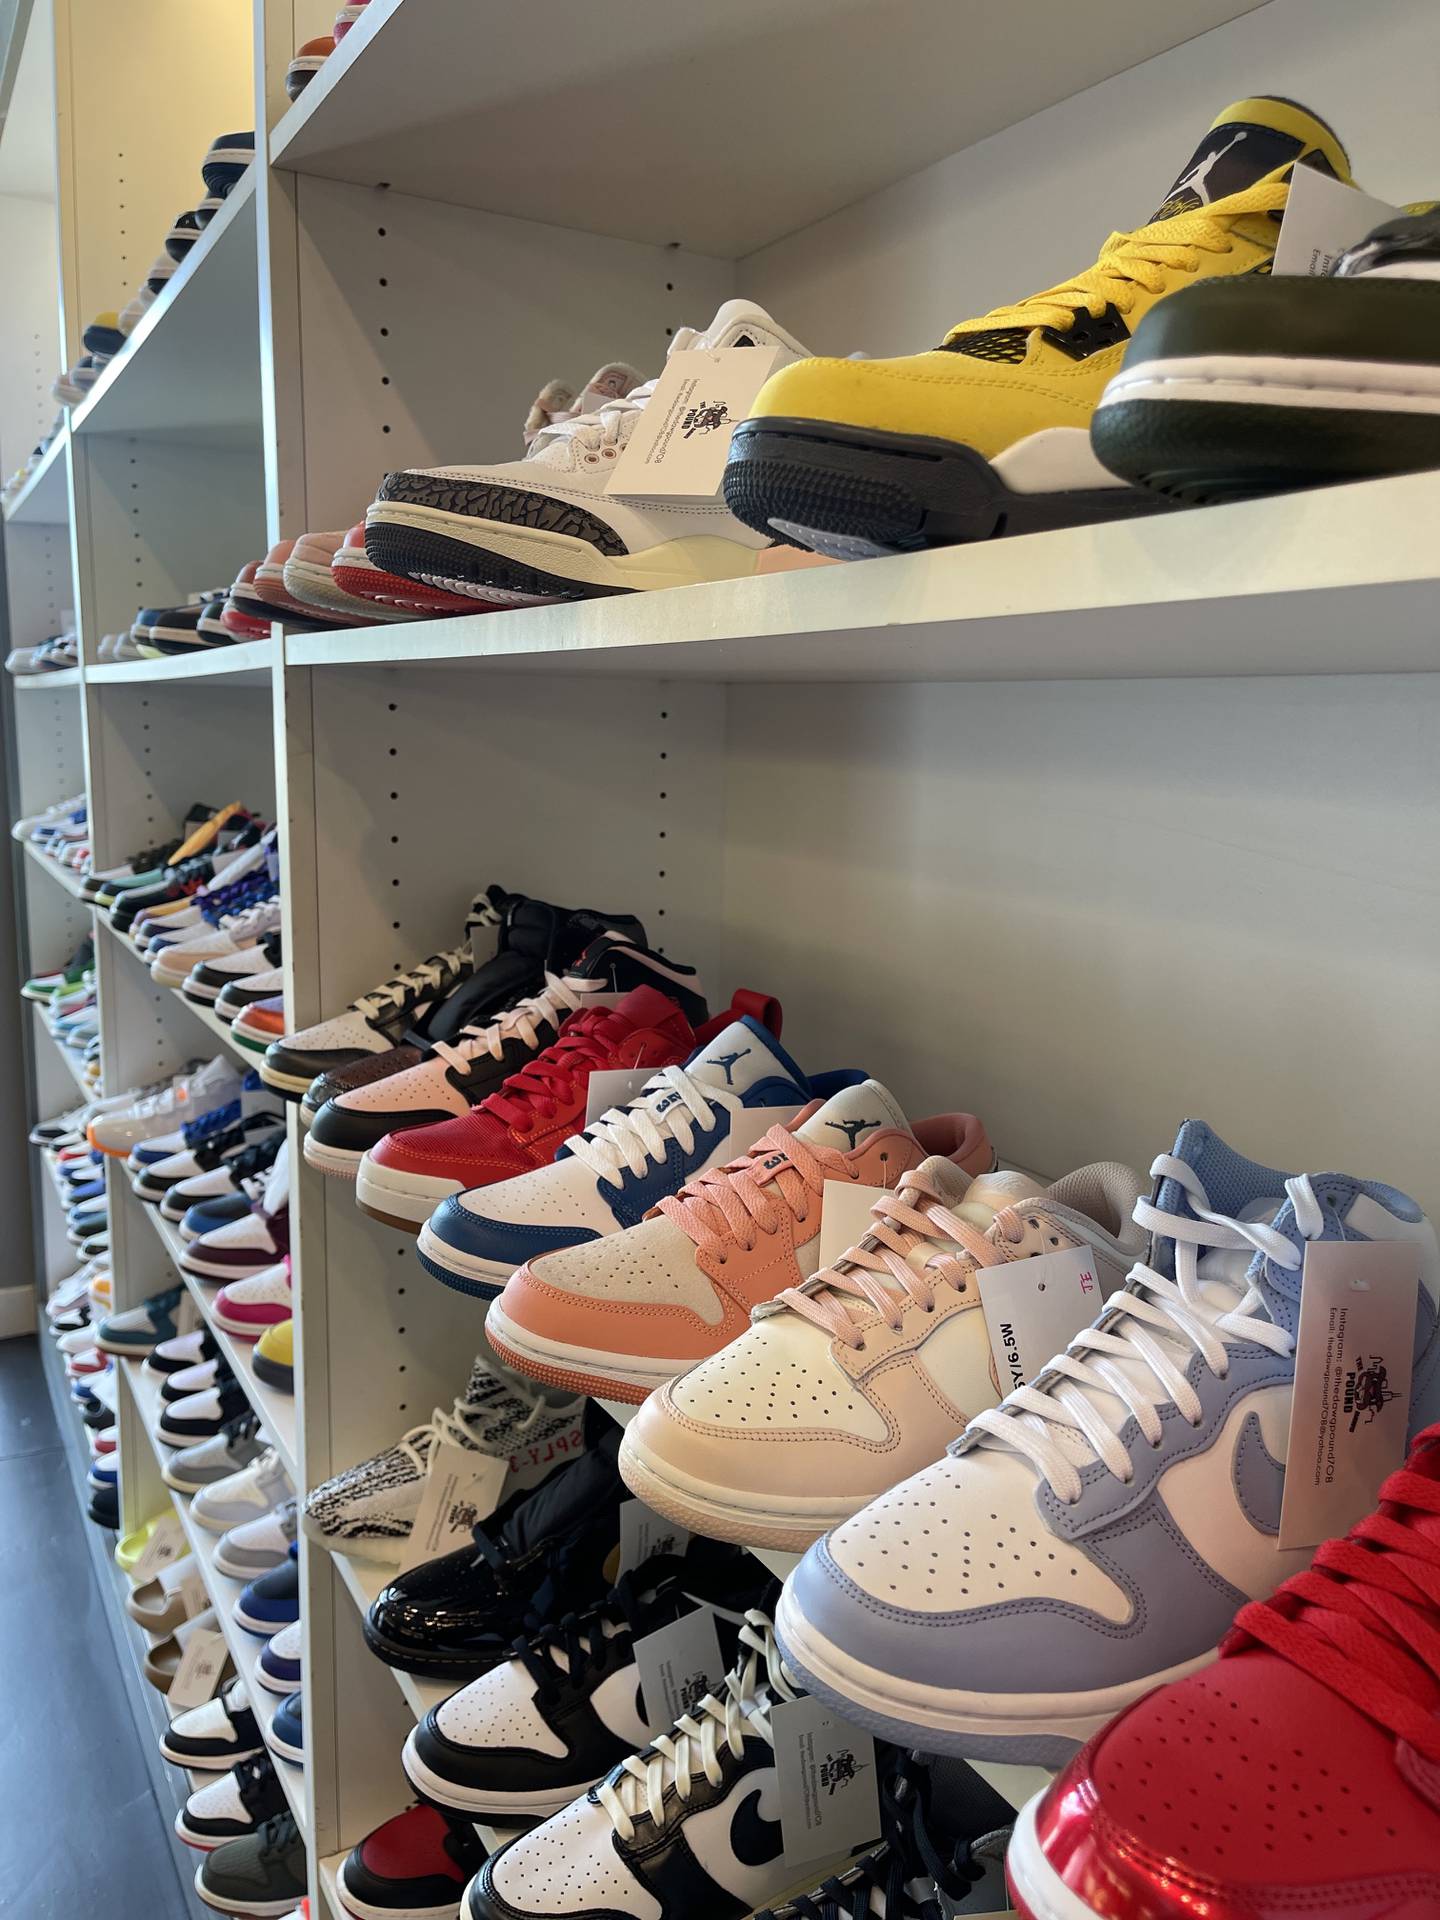 Limited edition specialist trainers in stock at The Dawg House, 206 Commons Drive, a new store that has opened in the Geneva Commons.